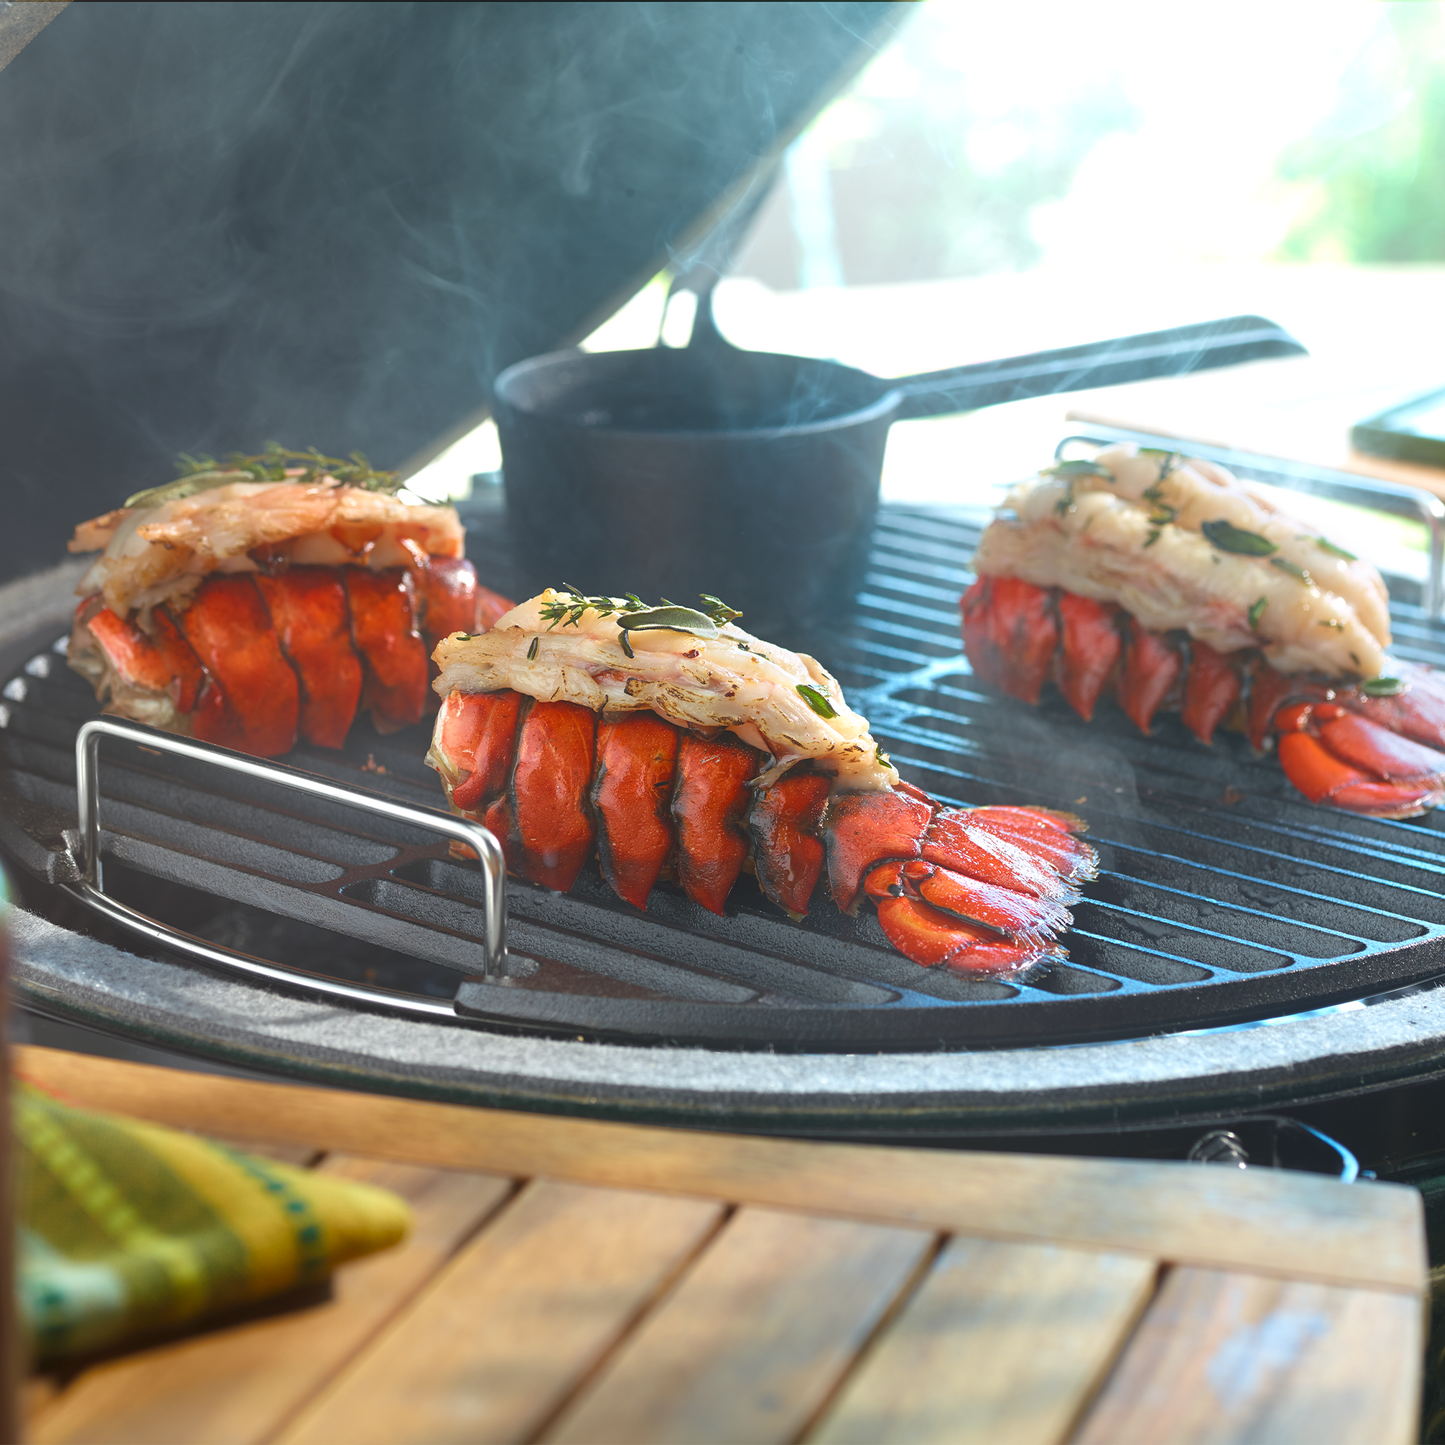 Buy One, Get One FREE: Sweetest Maine Lobster Tails (4-5 oz) + Free Shipping